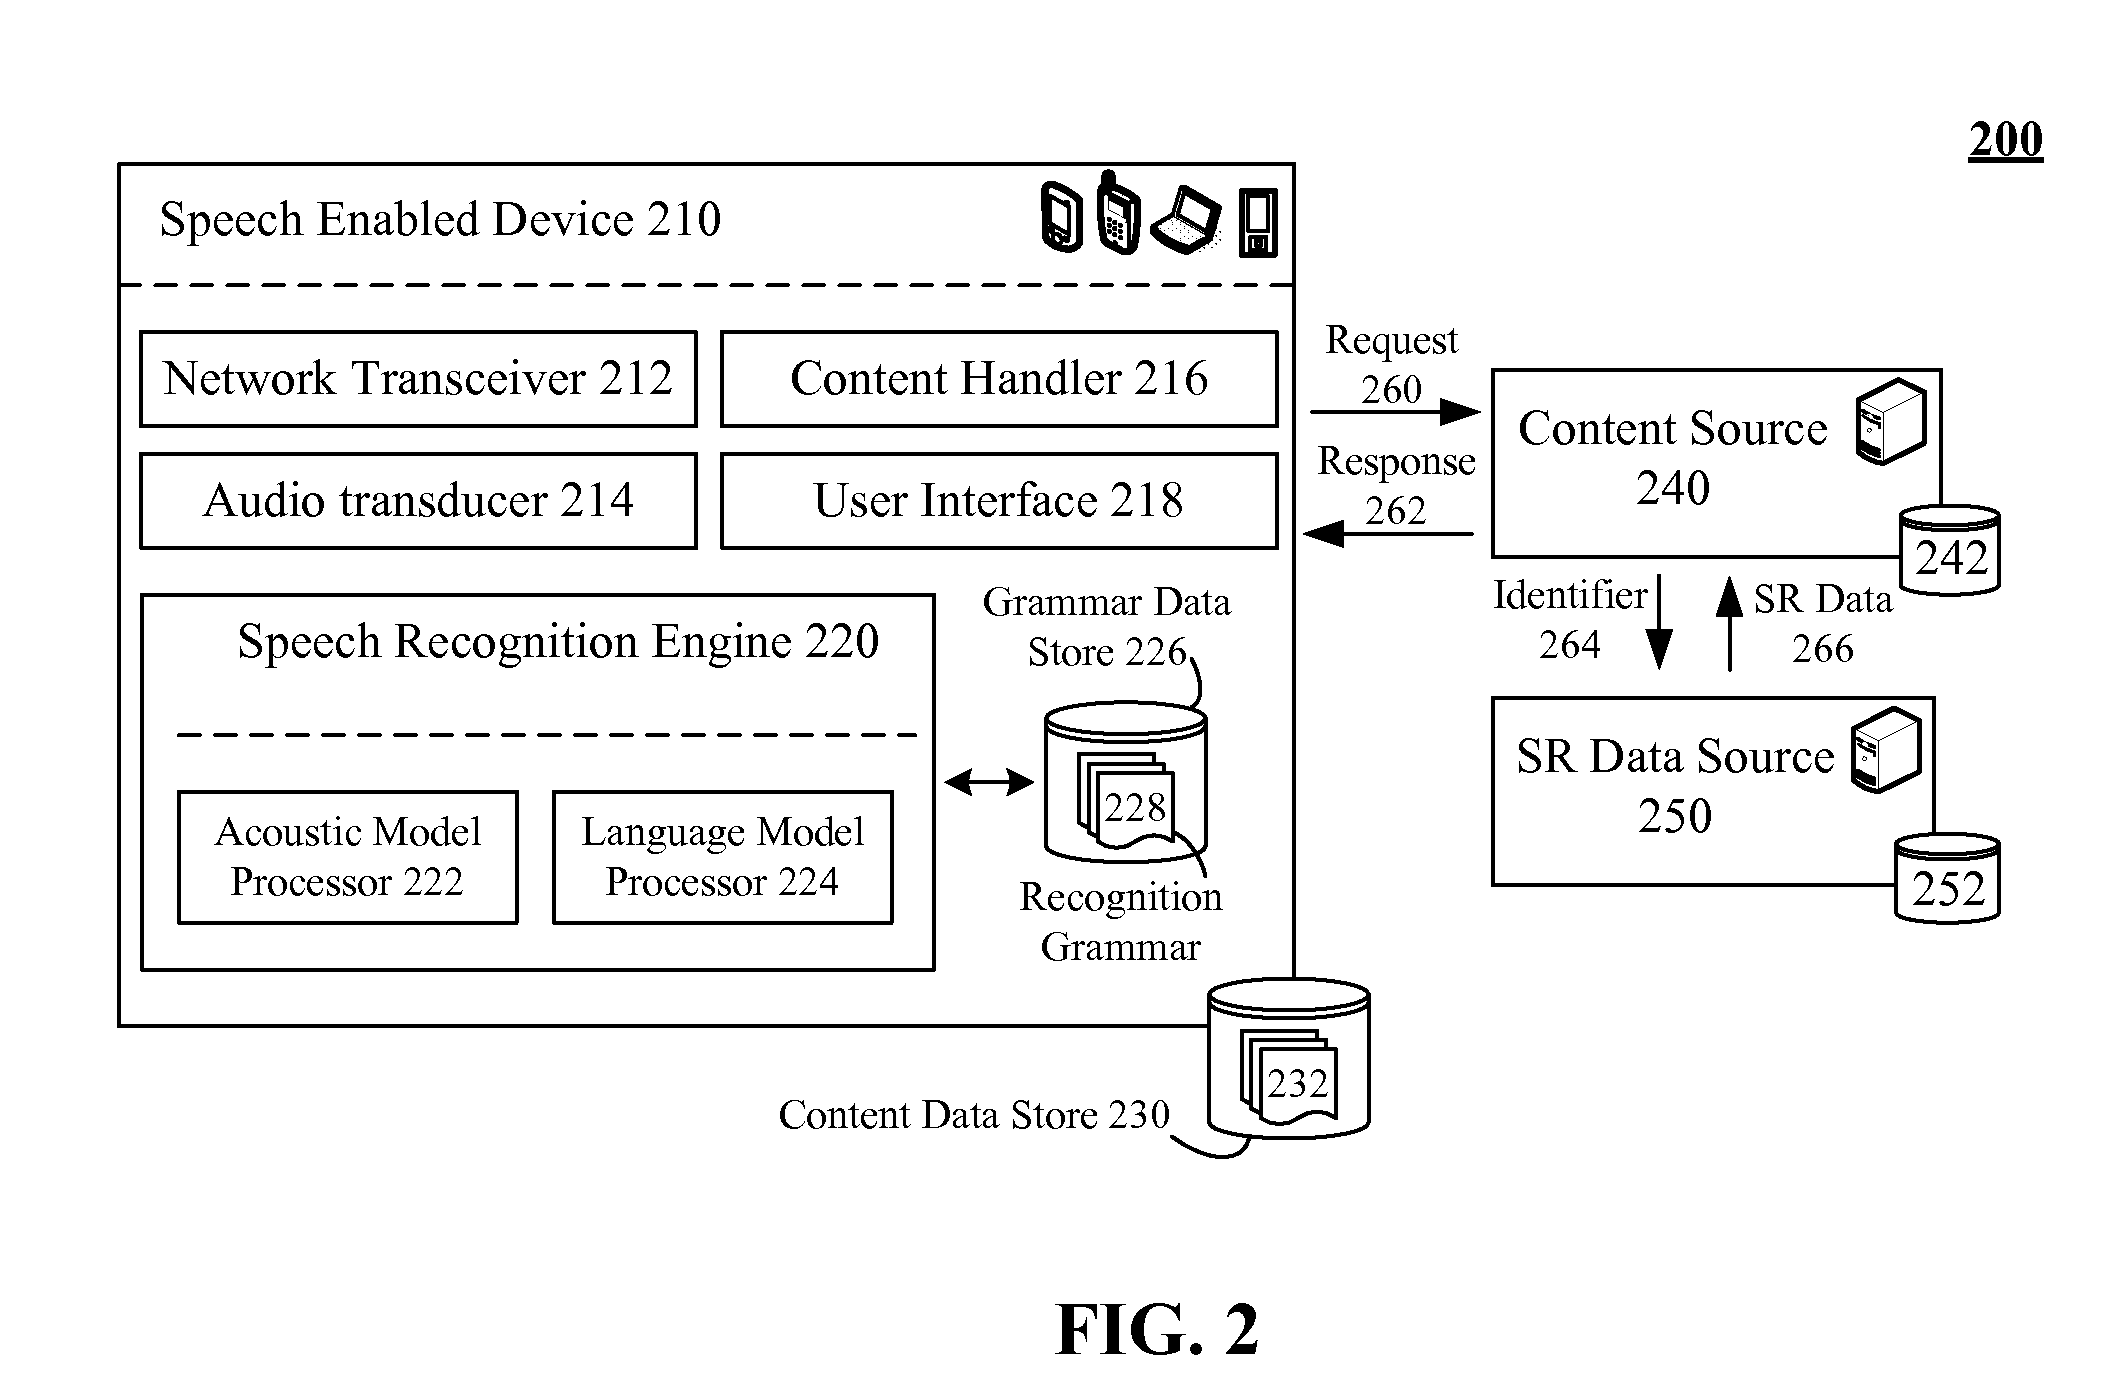 Providing speech recognition data to a speech enabled device when providing a new entry that is selectable via a speech recognition interface of the device